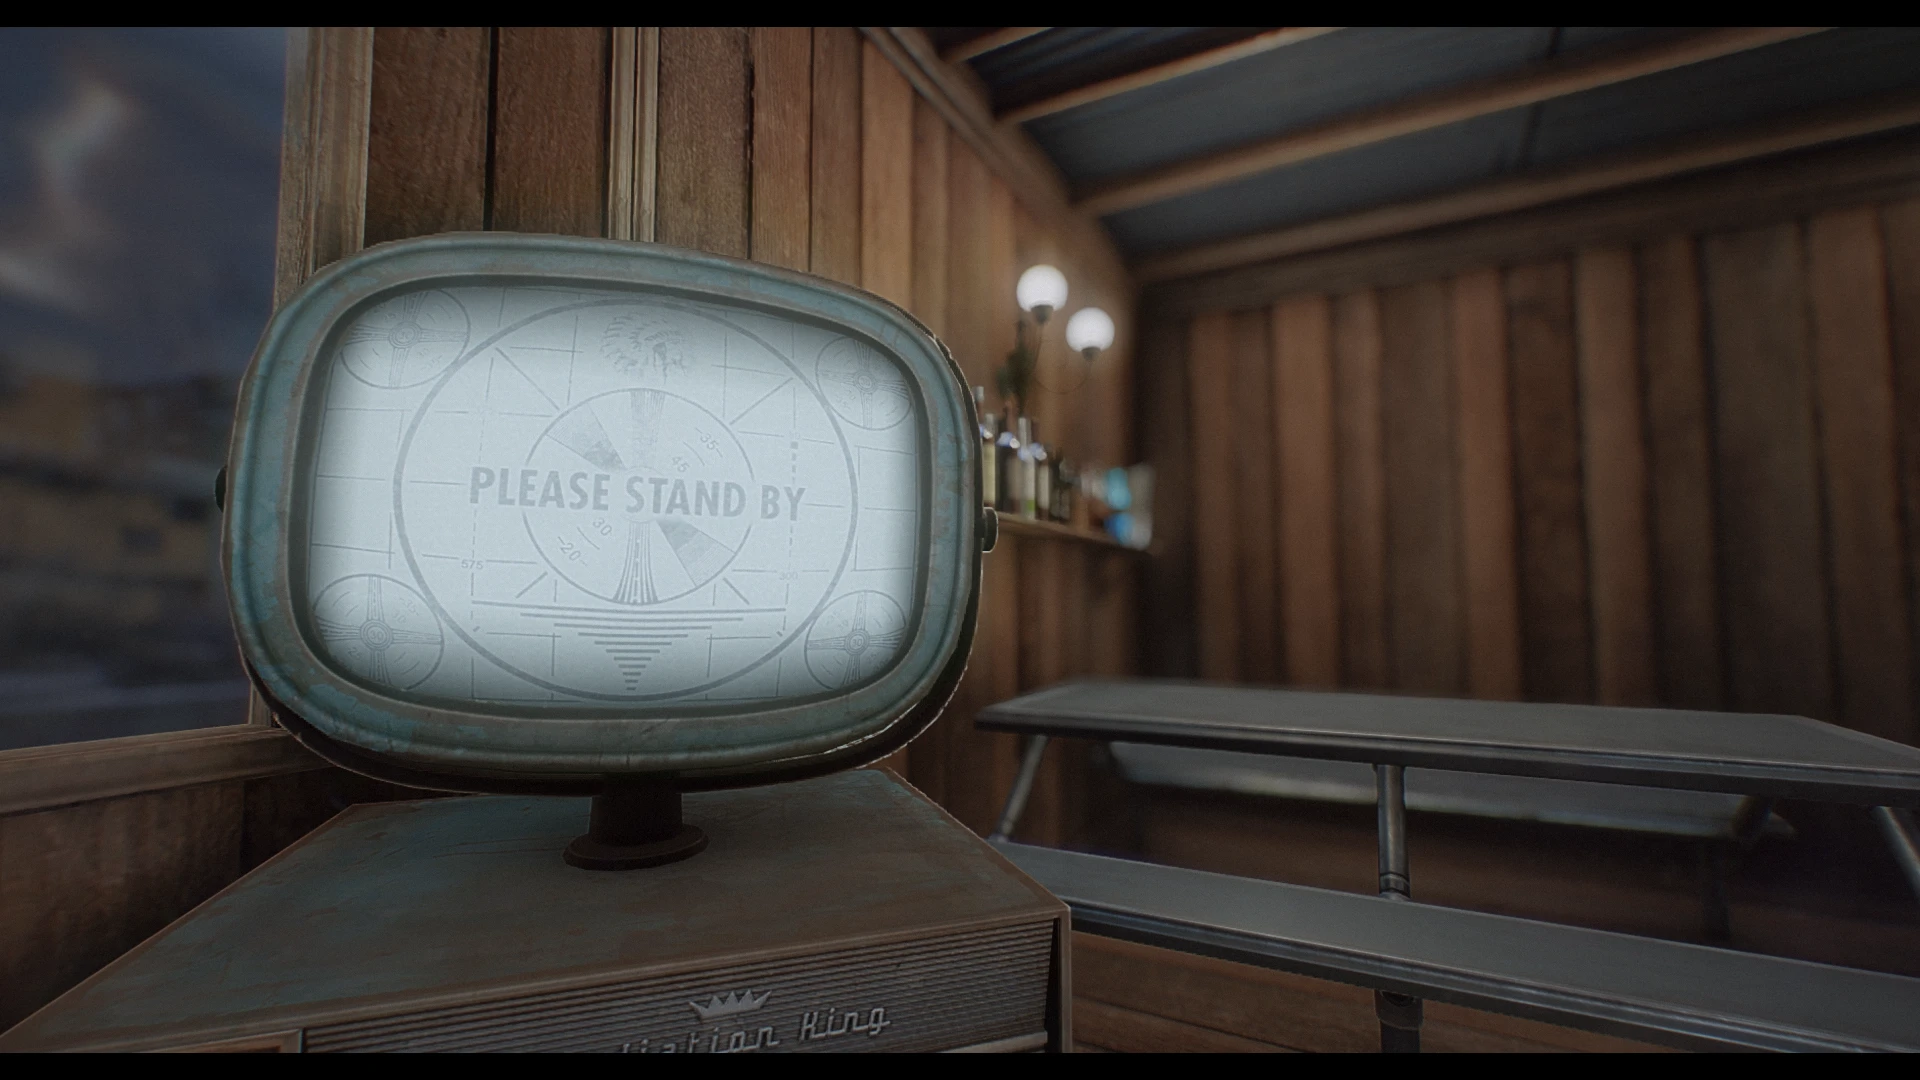 Картинка please Stand by. Stand by на телевизоре. Fallout 4 please Stand by. Fallout телевизор.